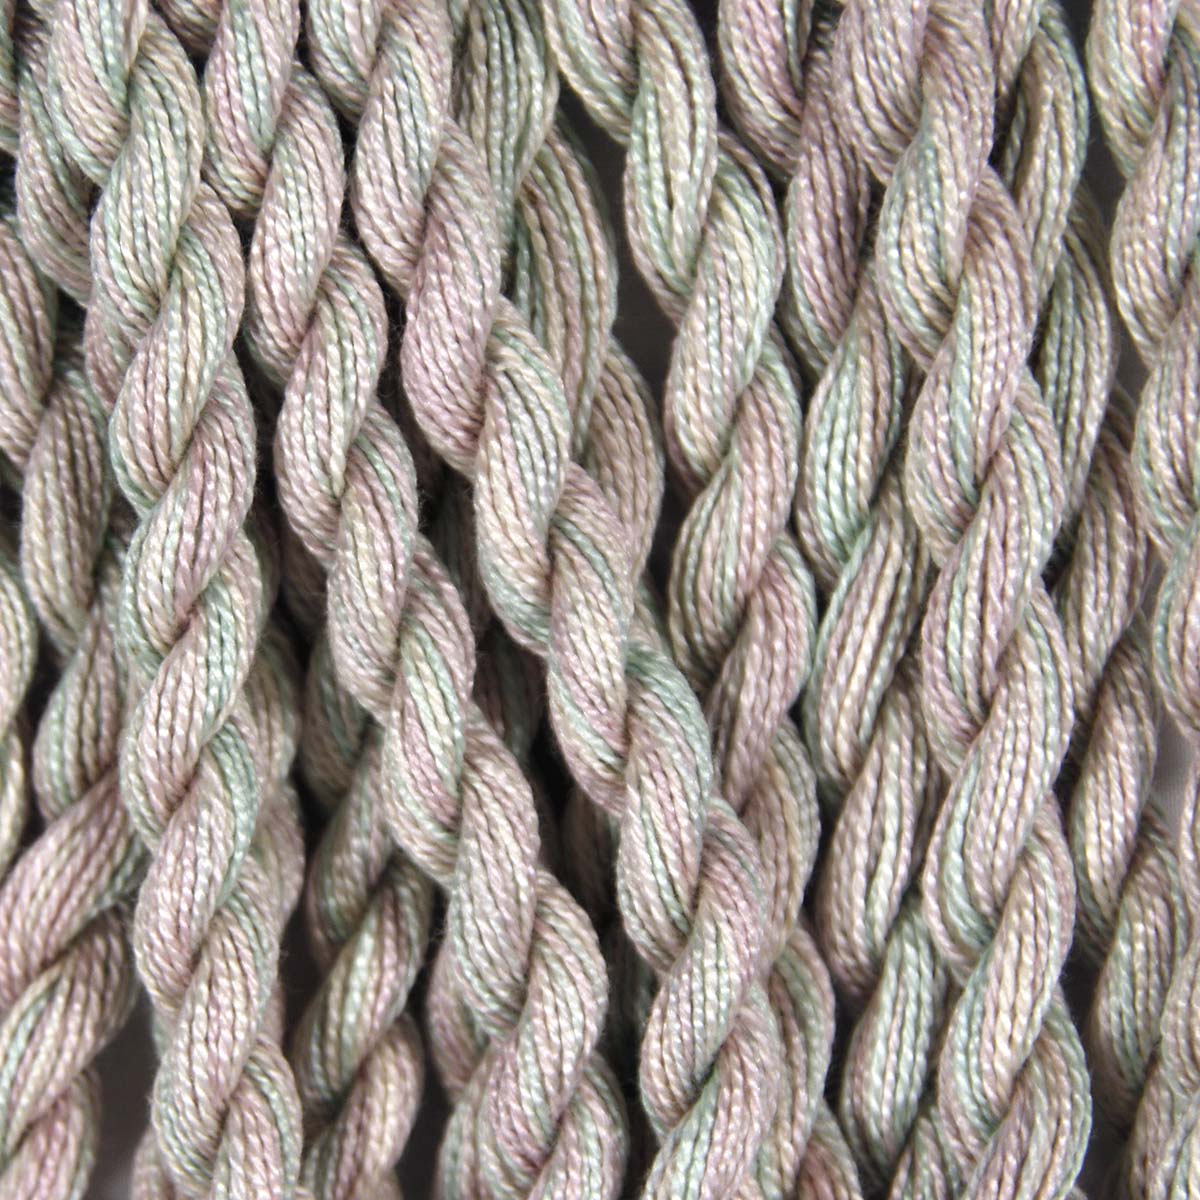 www.colourstreams.com.au Colour Streams Hand Dyed Cotton Threads Cotto Strands Slow Stitch Embroidery Textile Arts Fibre DL 44 Faded Rose Yellows Pinks Greens